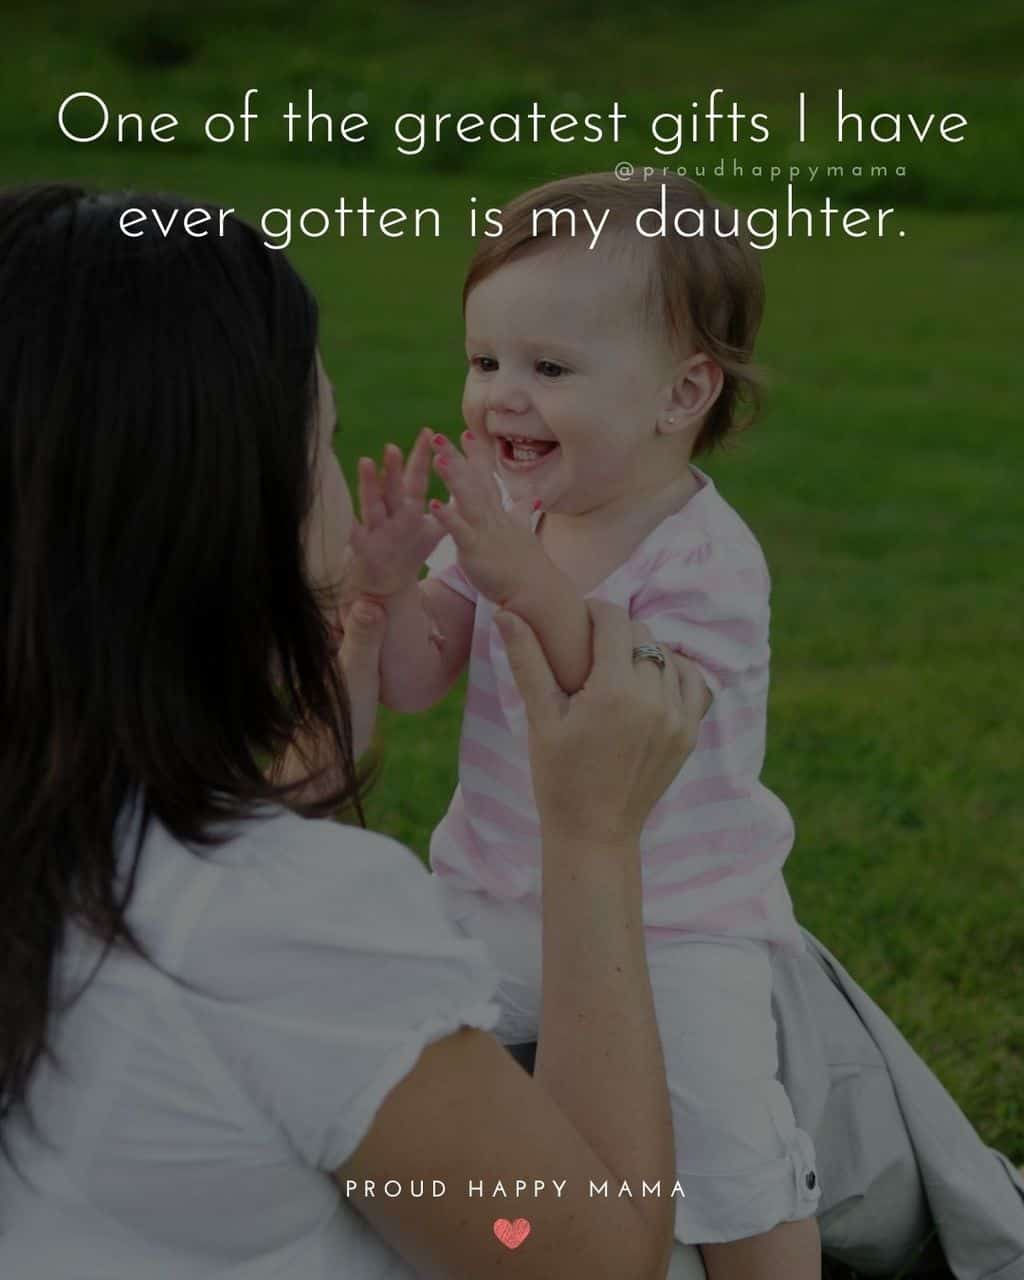 quote about my daughter - ‘One of the greatest gifts I have ever gotten is my daughter.’